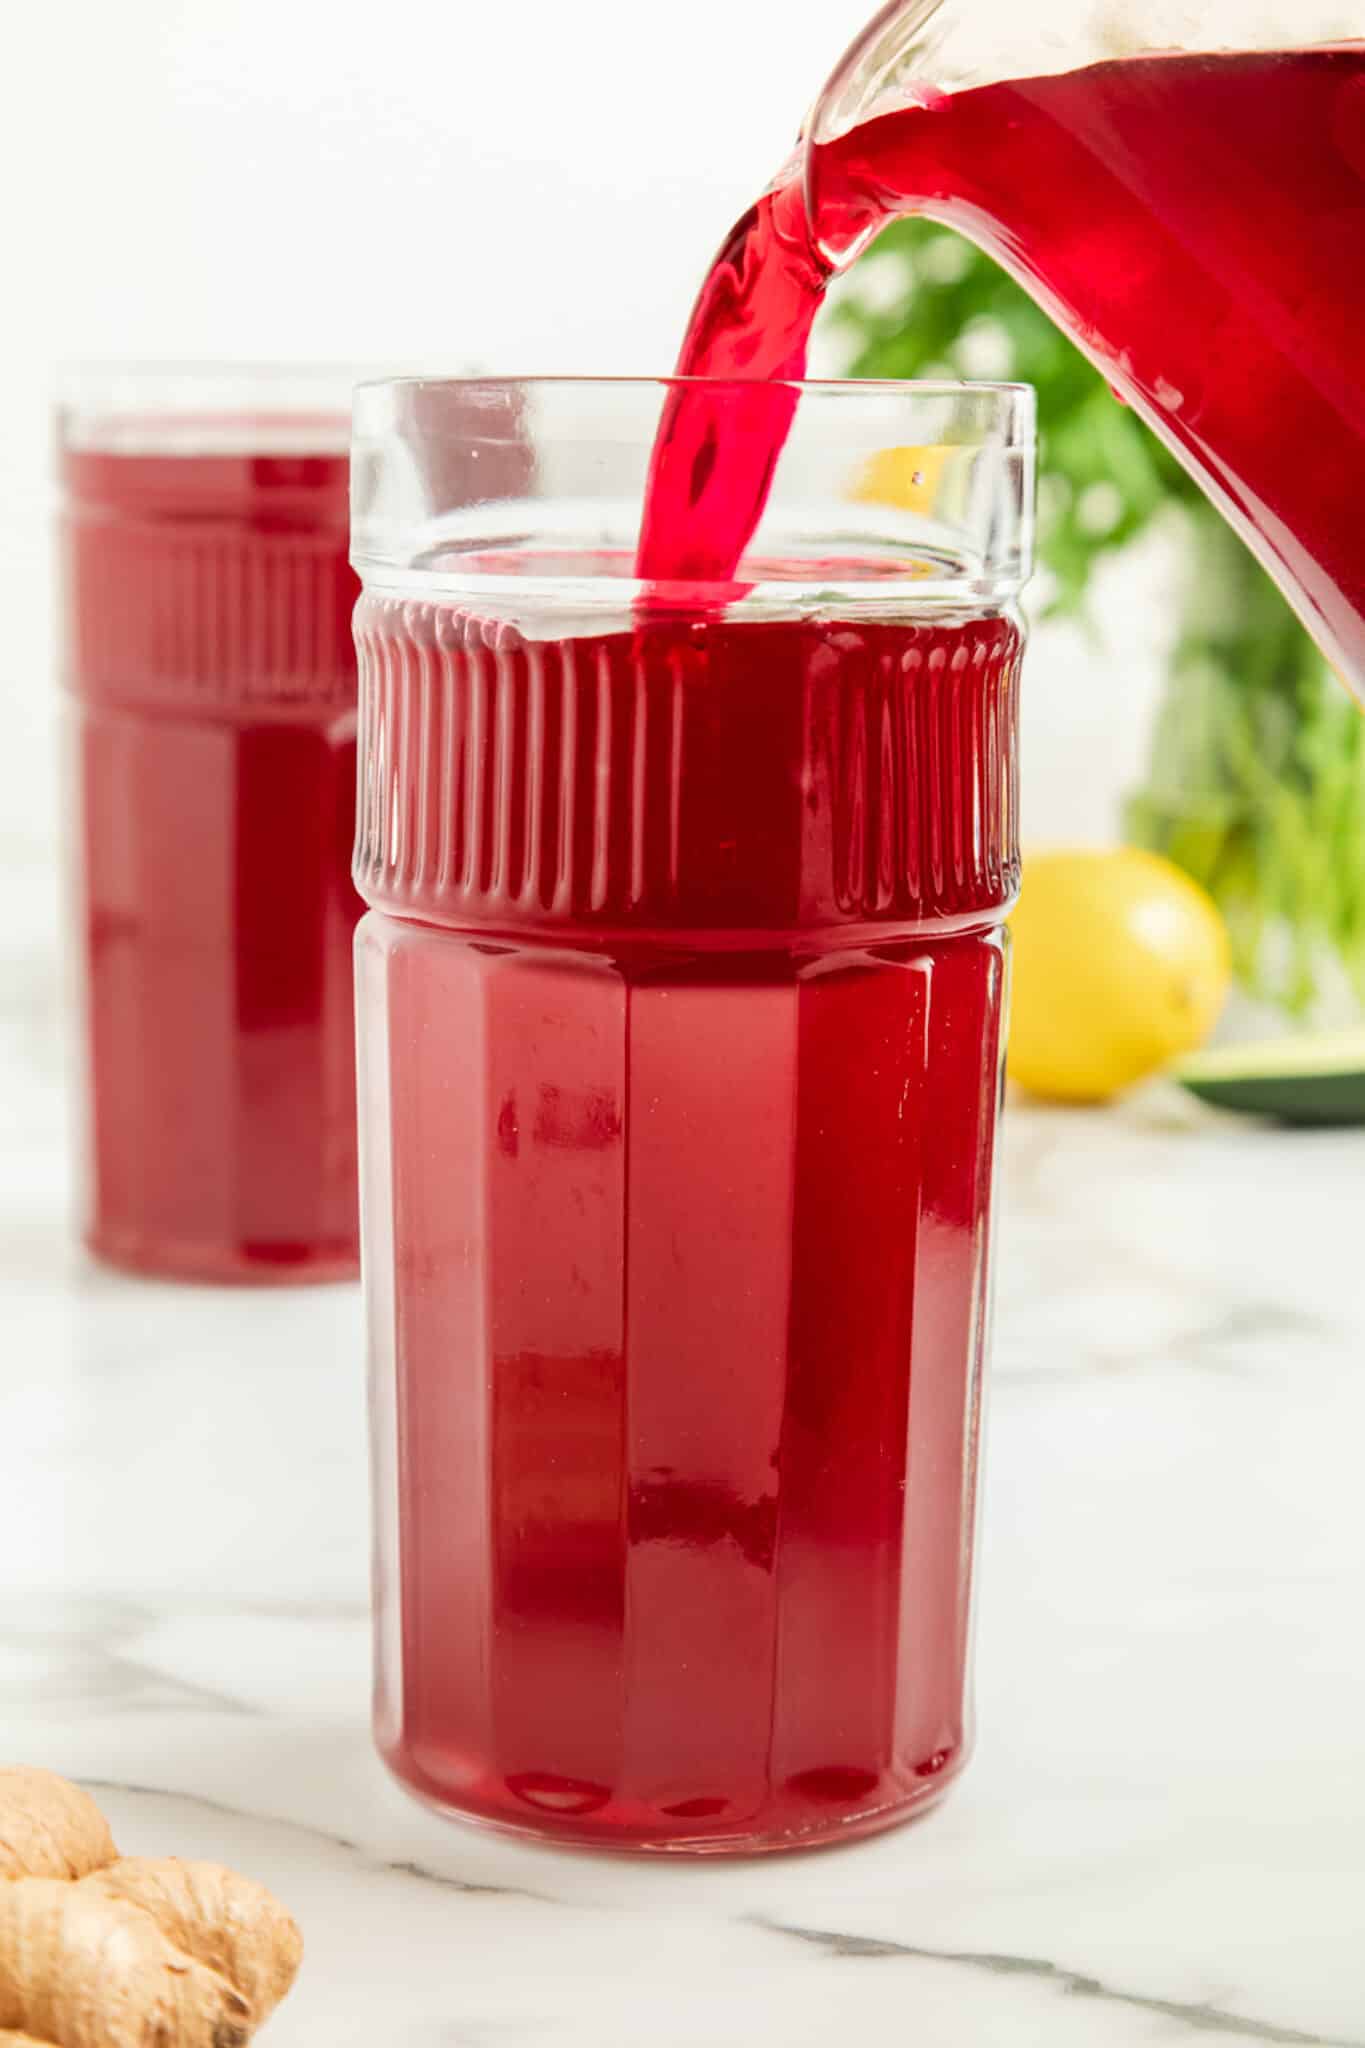 https://www.cleaneatingkitchen.com/wp-content/uploads/2022/08/pouring-beet-juice-scaled.jpg